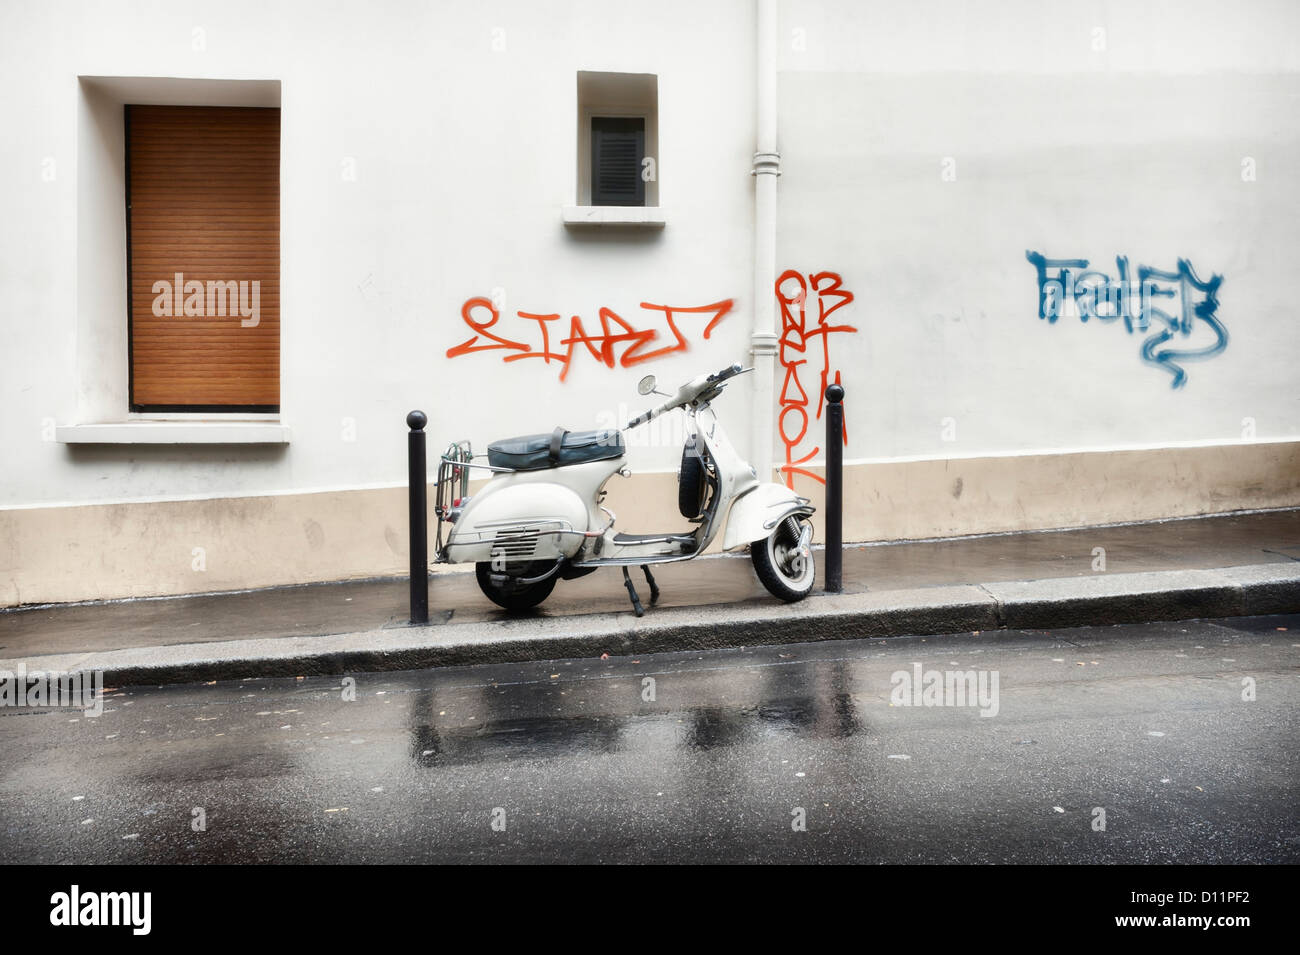 Paris, France: Vespa motor scooter parked on a city street in the rain Stock Photo